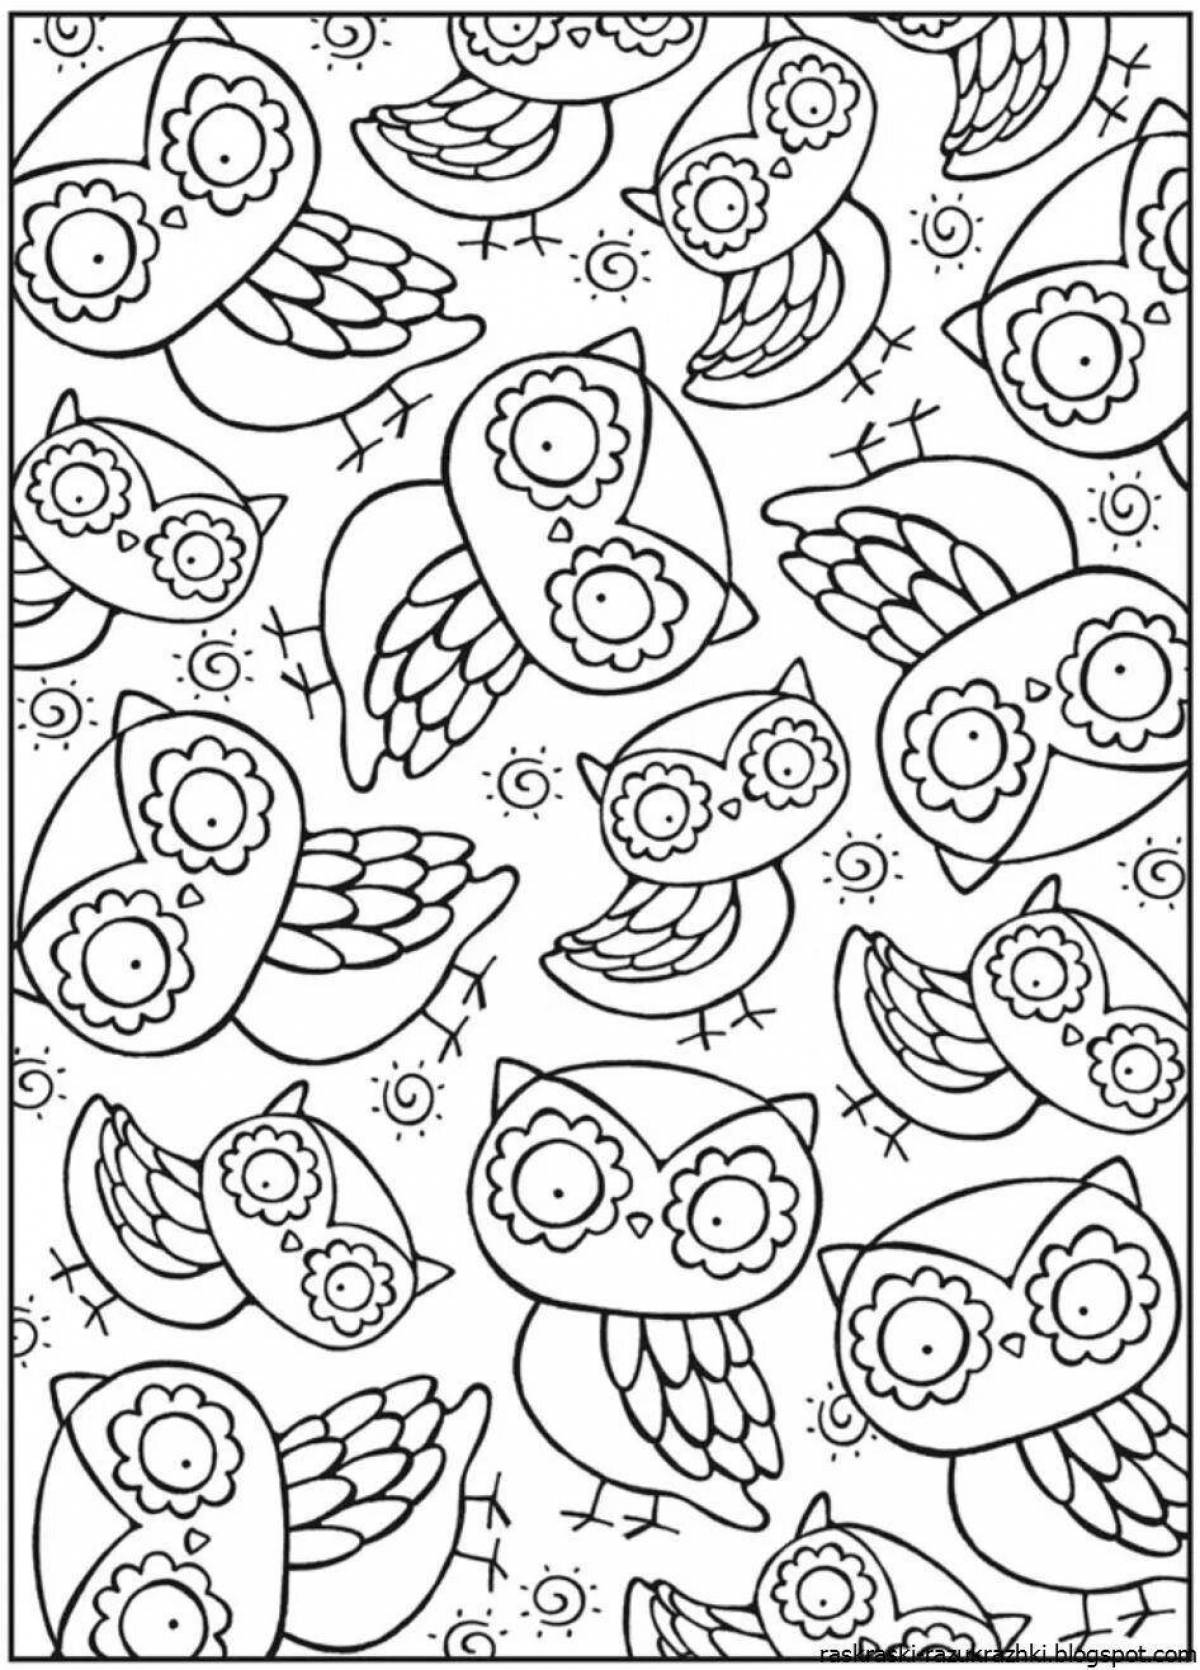 Relaxing anti-stress little coloring book